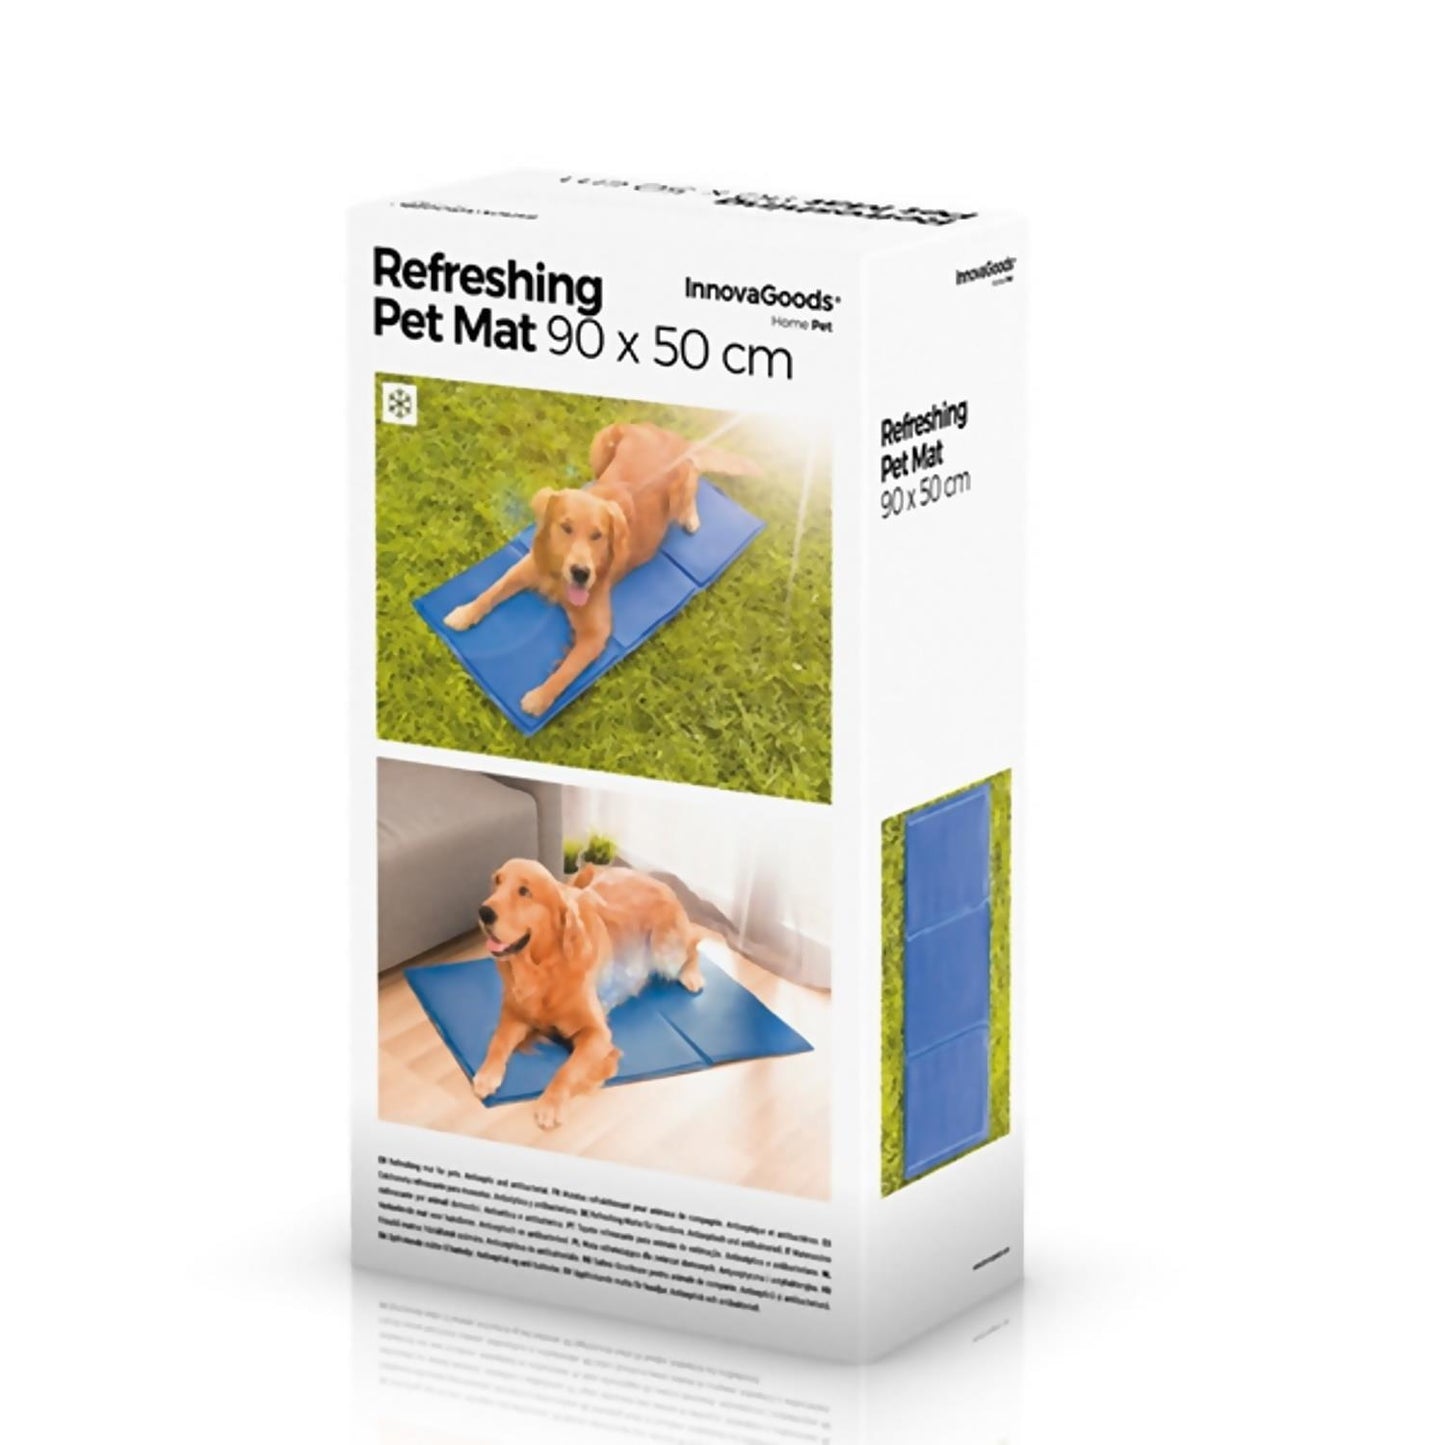 Soothe Your Pet With Cooling Gel For Relaxation And Comfort